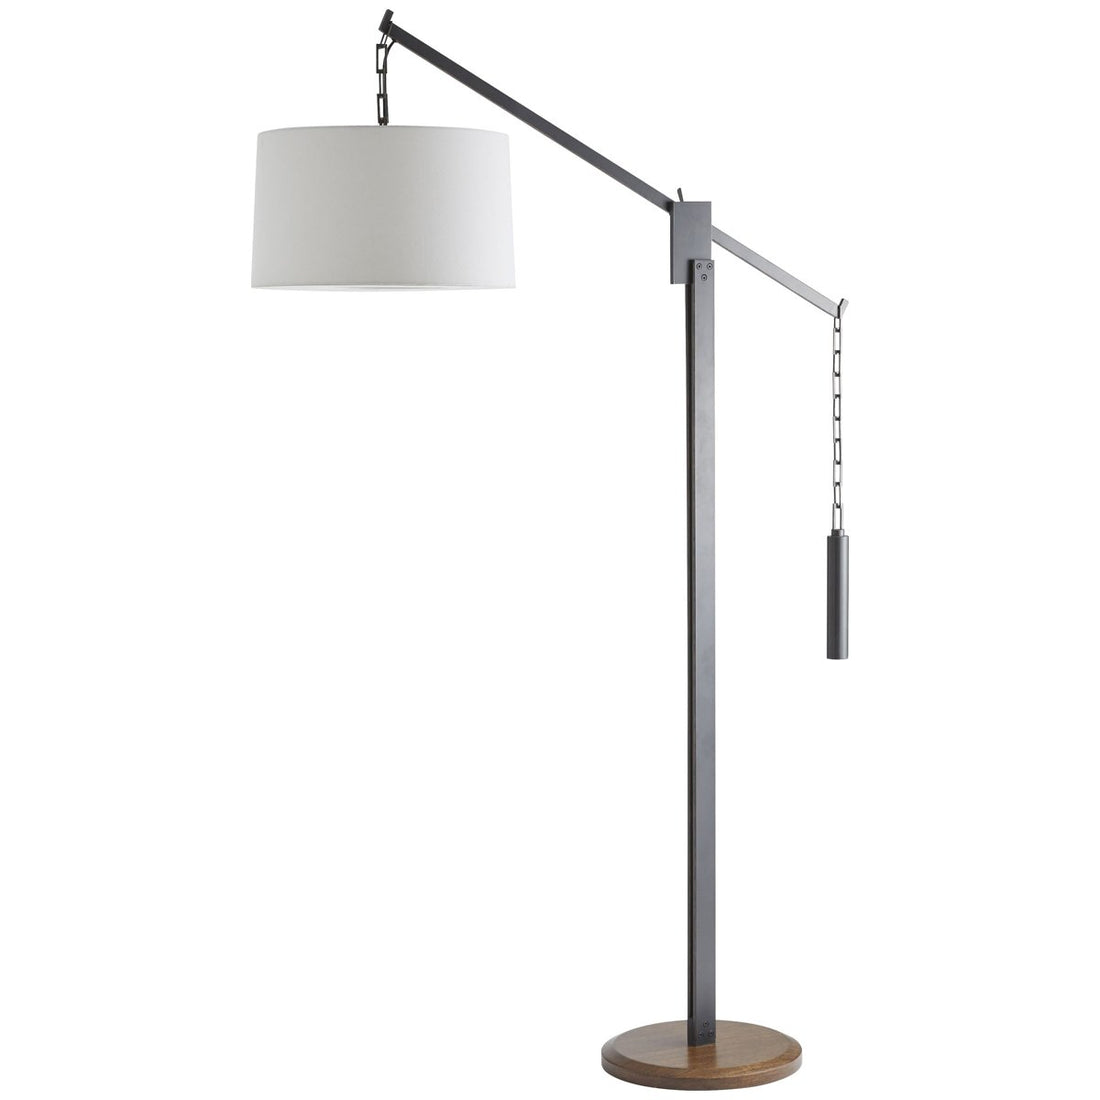 Arteriors The Ray Booth Counterweight Floor Lamp